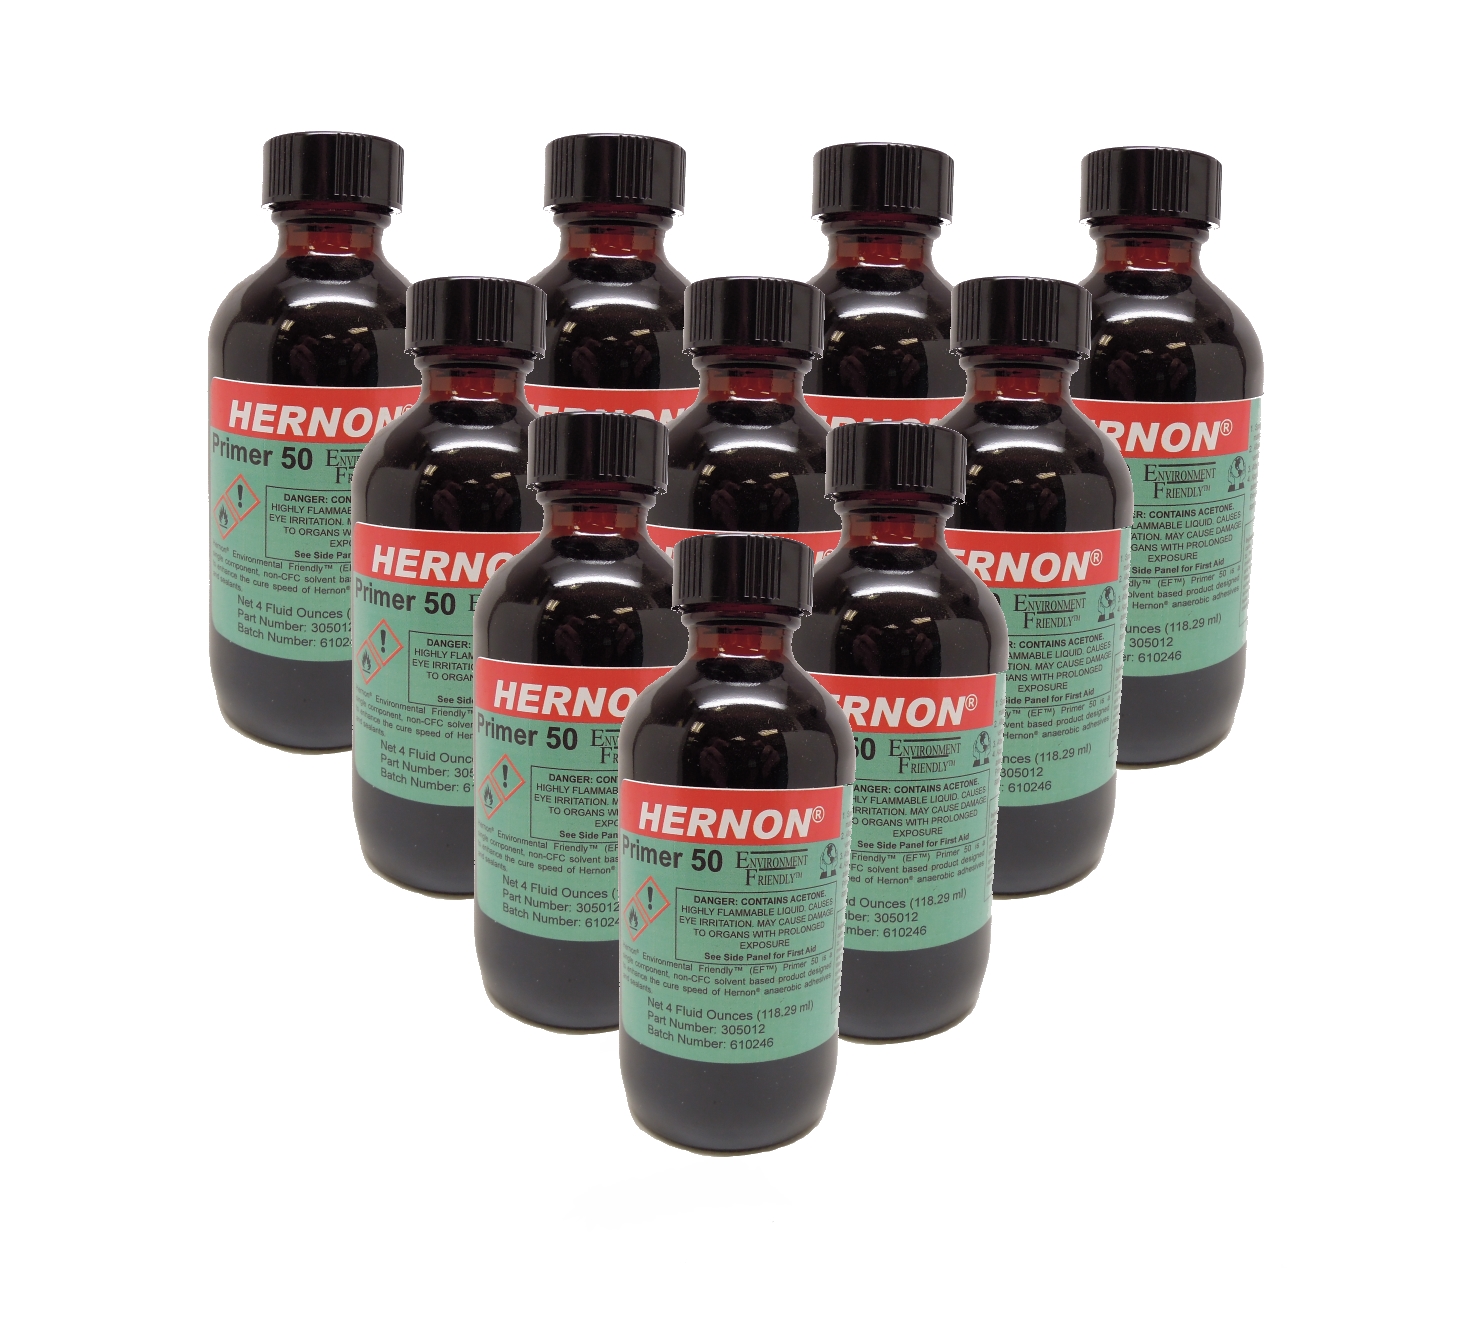 Hernon EF PRIMER 50 4-10 Adhesive - 4 oz. Bottle with pump 10-pack - Fast Shipping - DEF Products